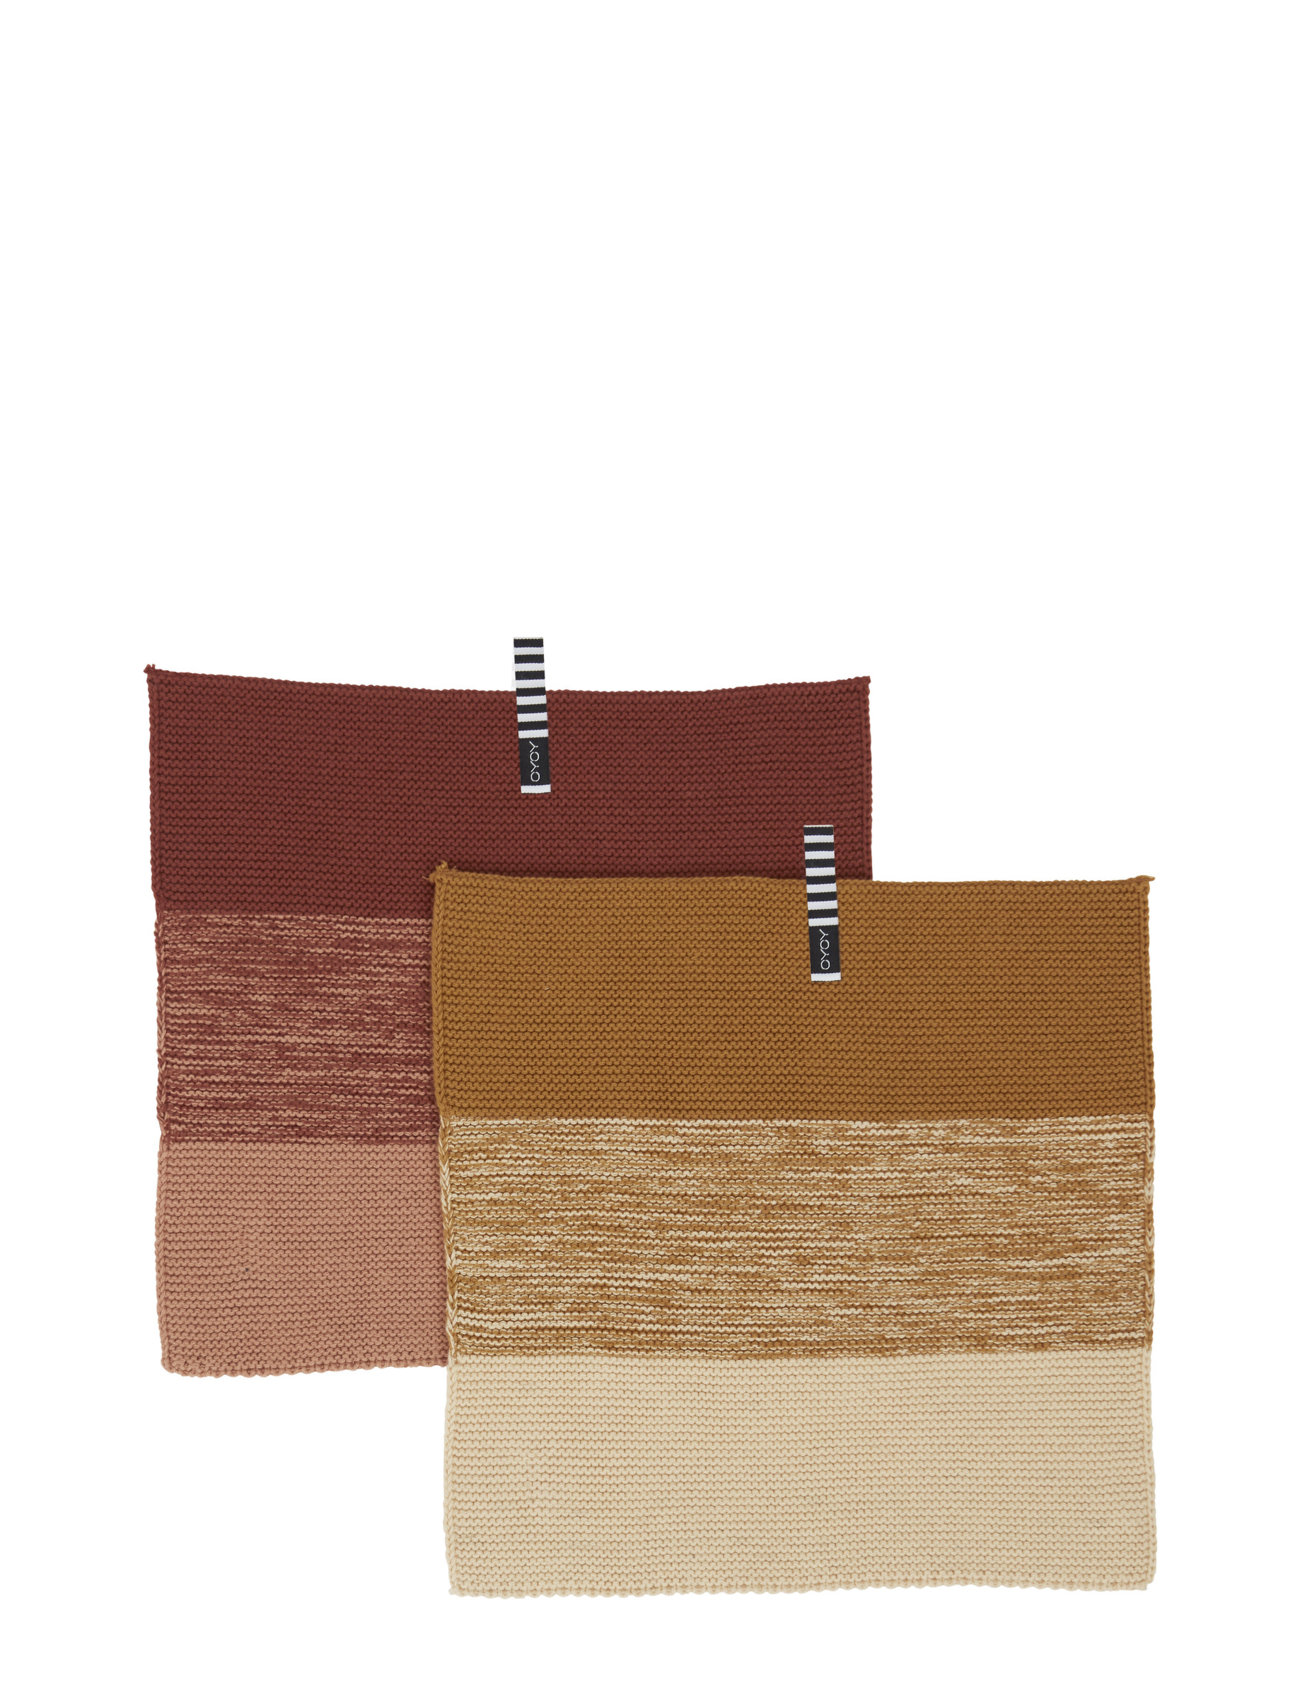 Niji Dish Cloth - Pack Of 2 Home Kitchen Wash & Clean Dishes Cloths & Dishbrush Brown OYOY Living Design